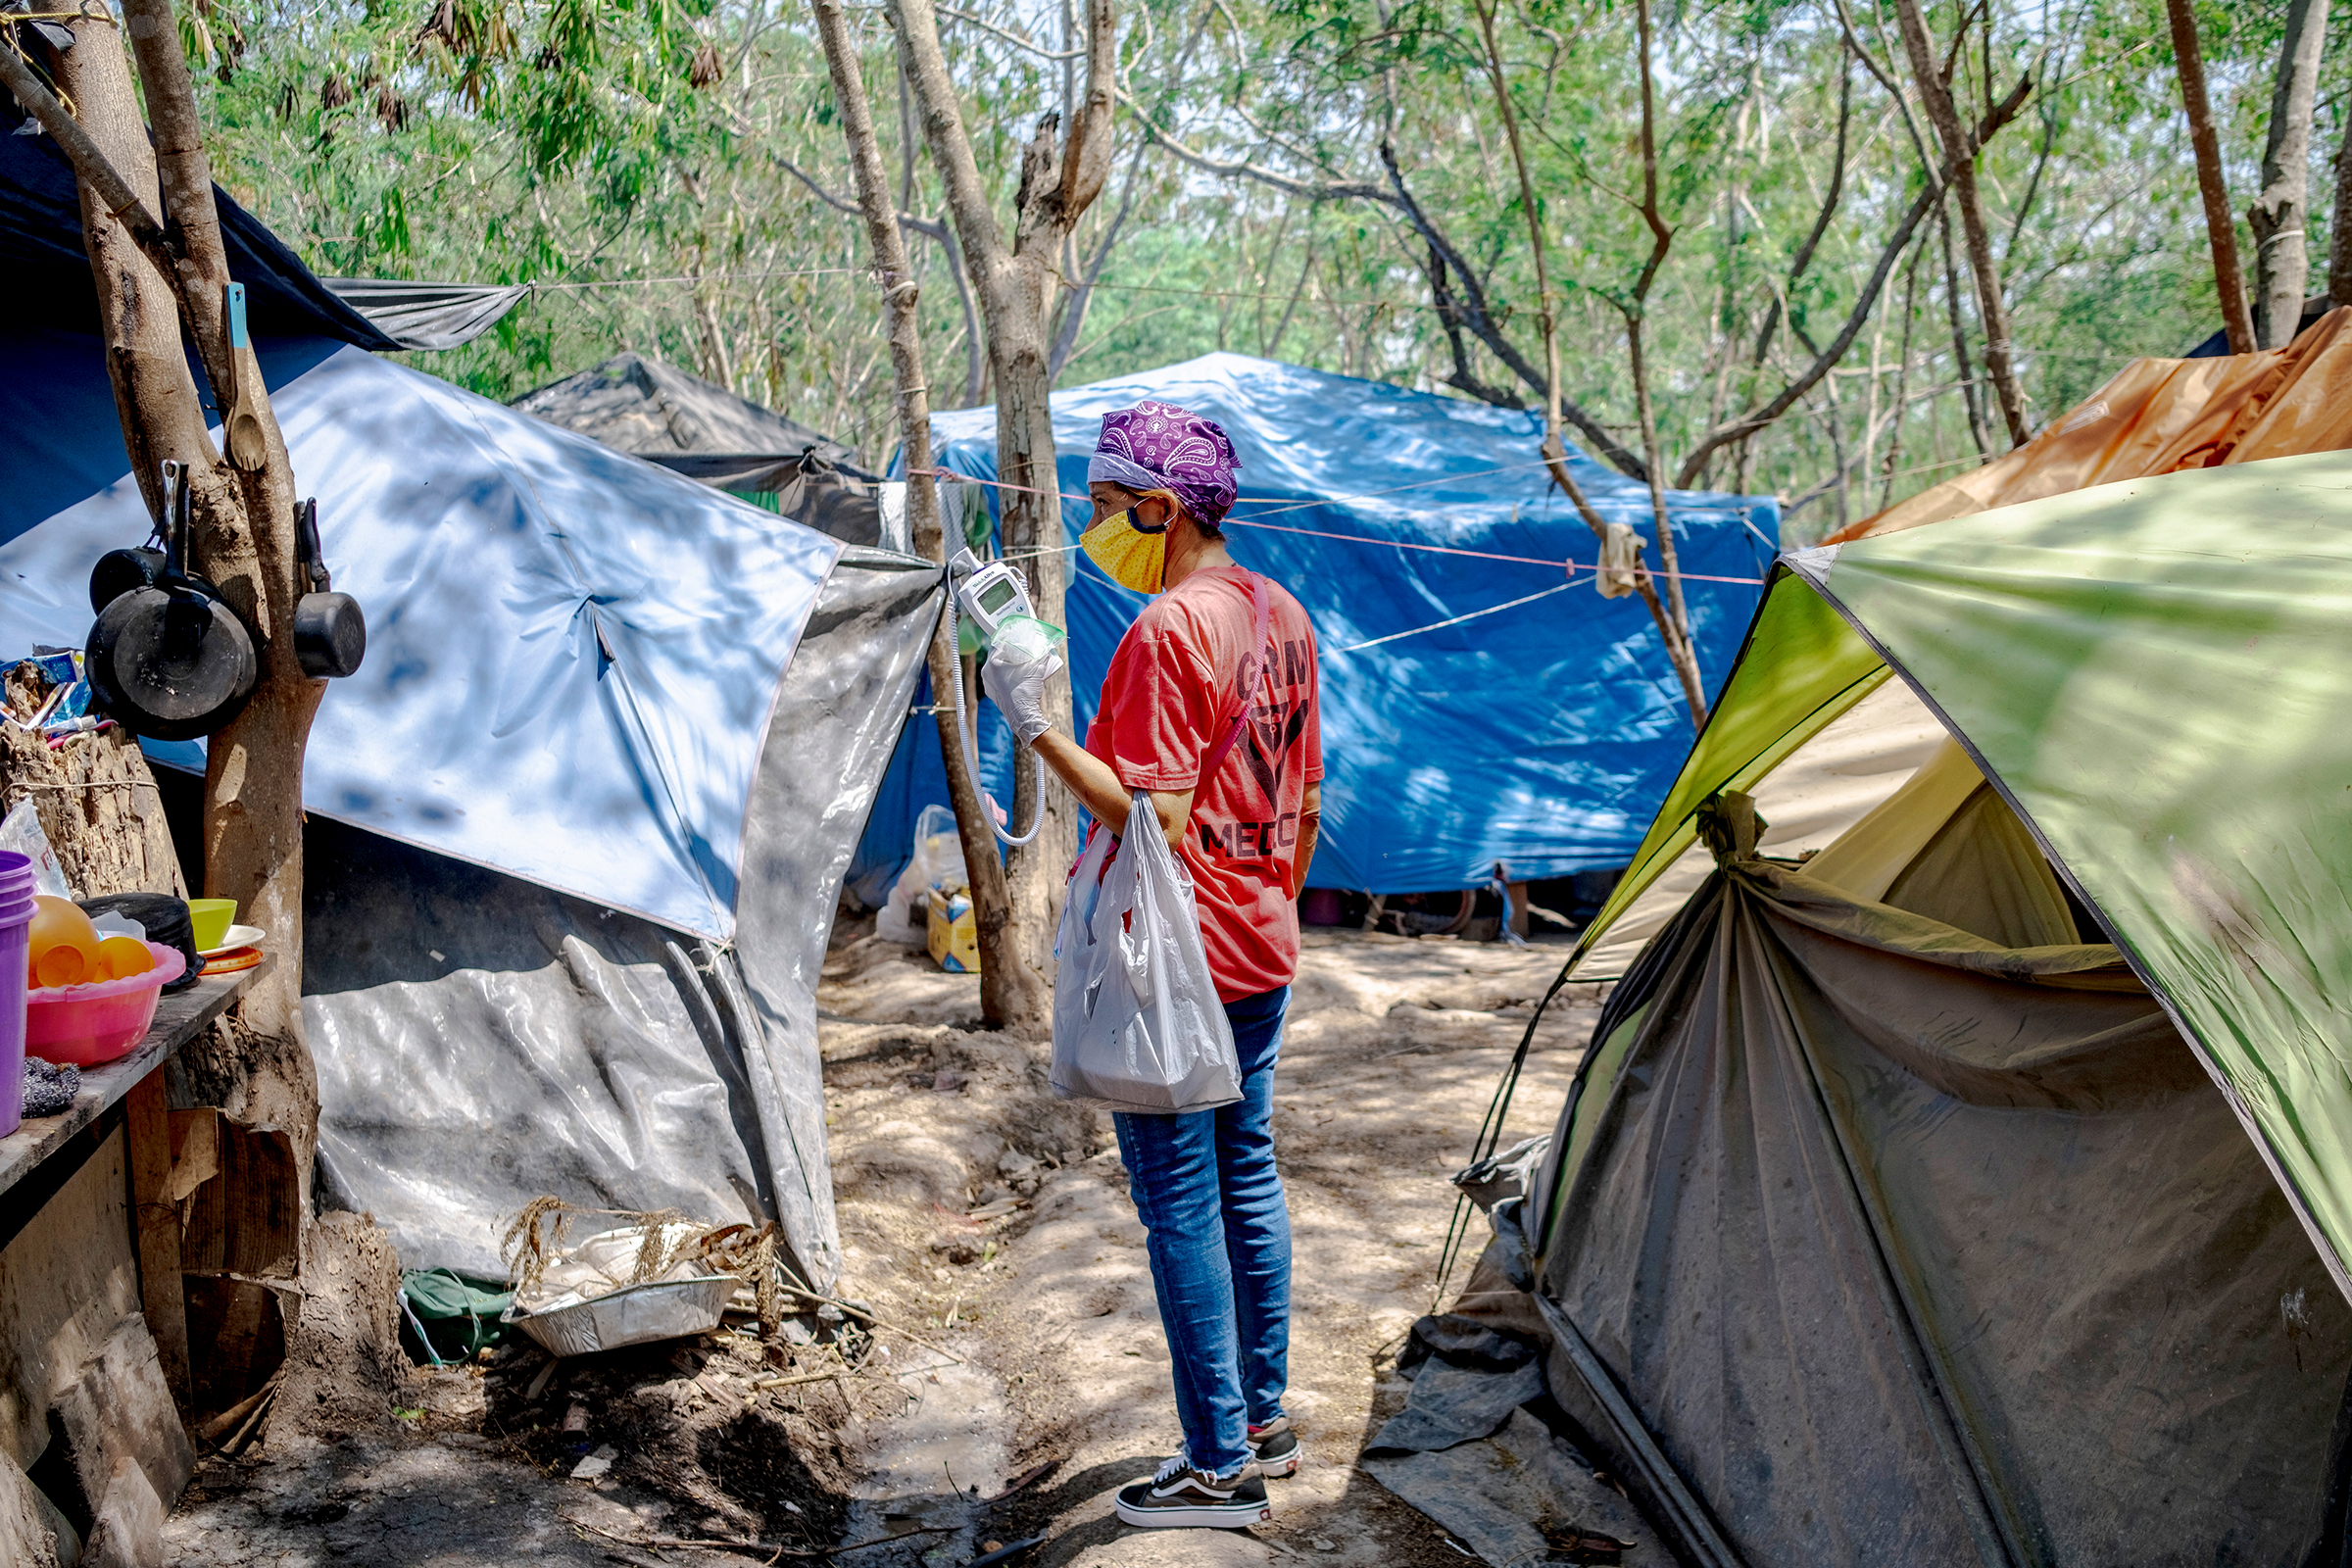 A member of the Global Responses Management medical team in the camp on April 24. "Social distancing and quarantine in refugee situations is nearly impossible," says Helen Perry, an acute care nurse practitioner and executive director of GRM.